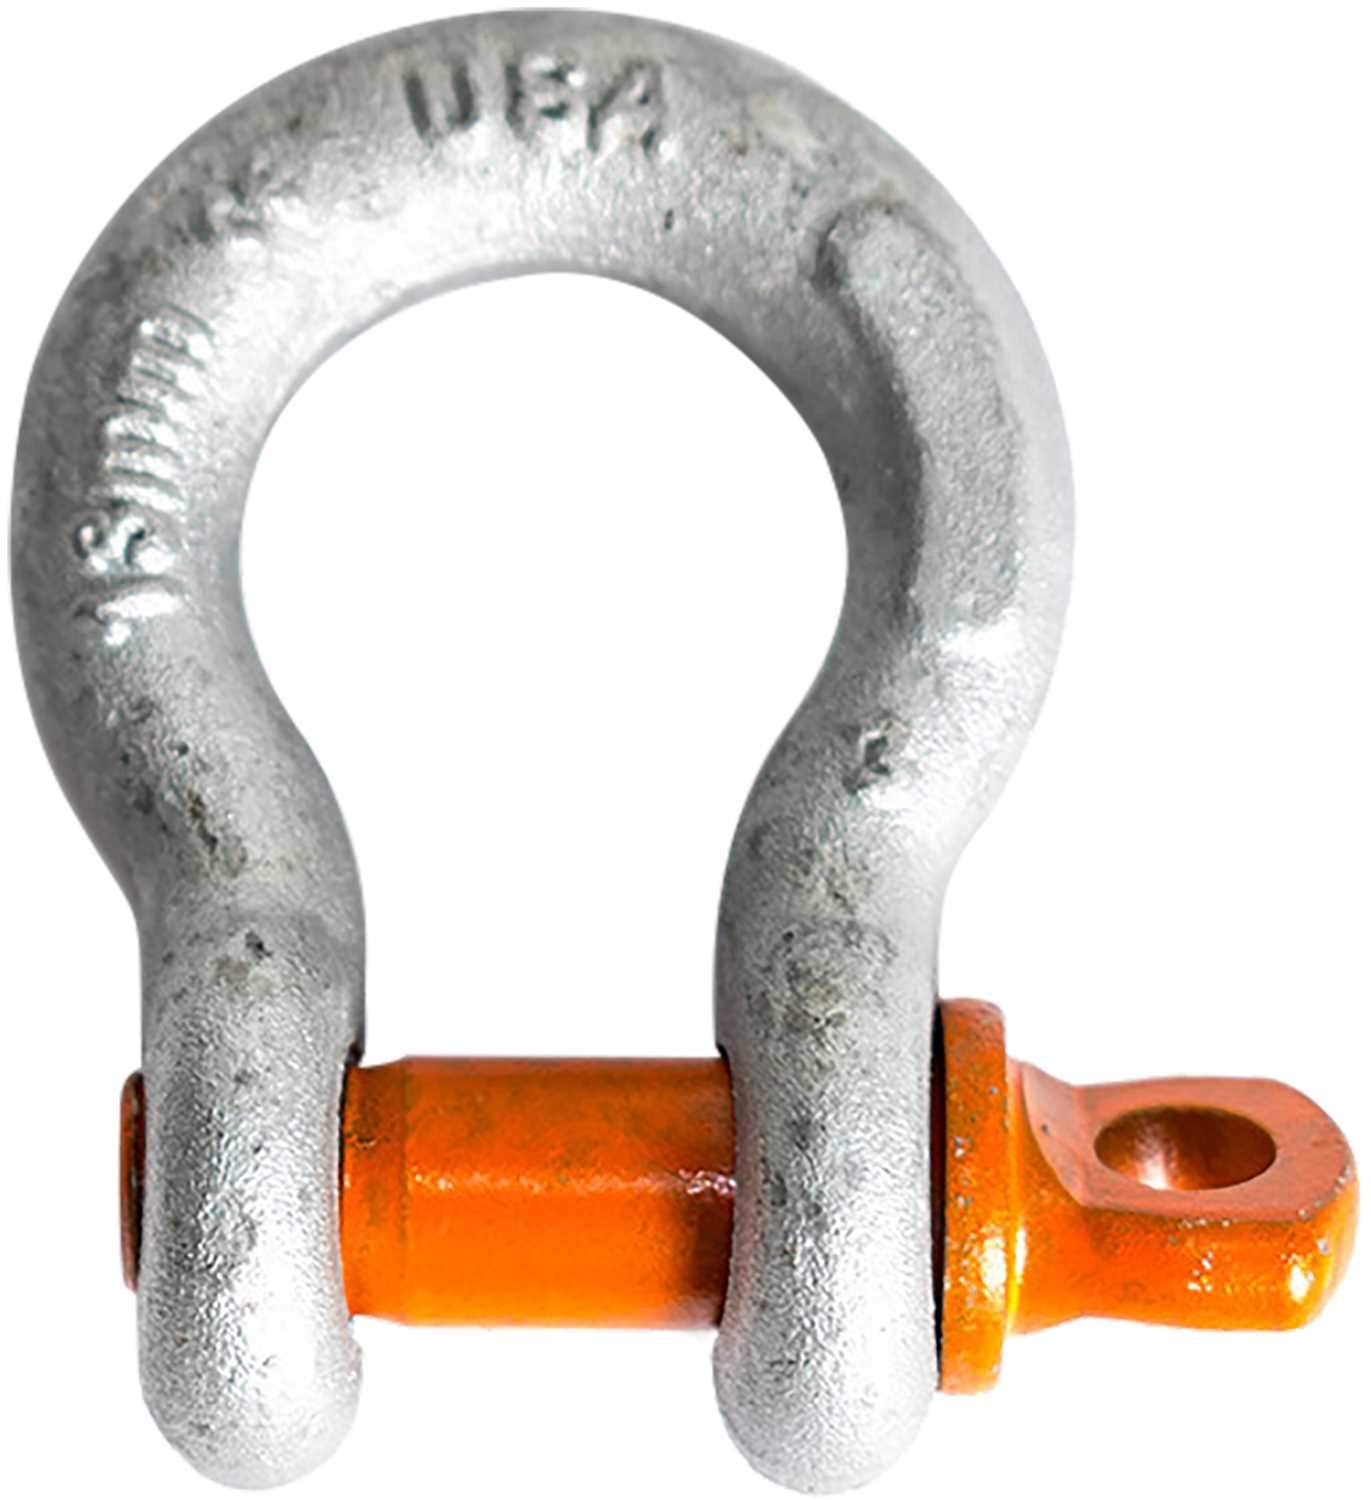 ADJ American DJ 1/2-inch Shackle for Video Panel Rigging Bars - PSSL ProSound and Stage Lighting